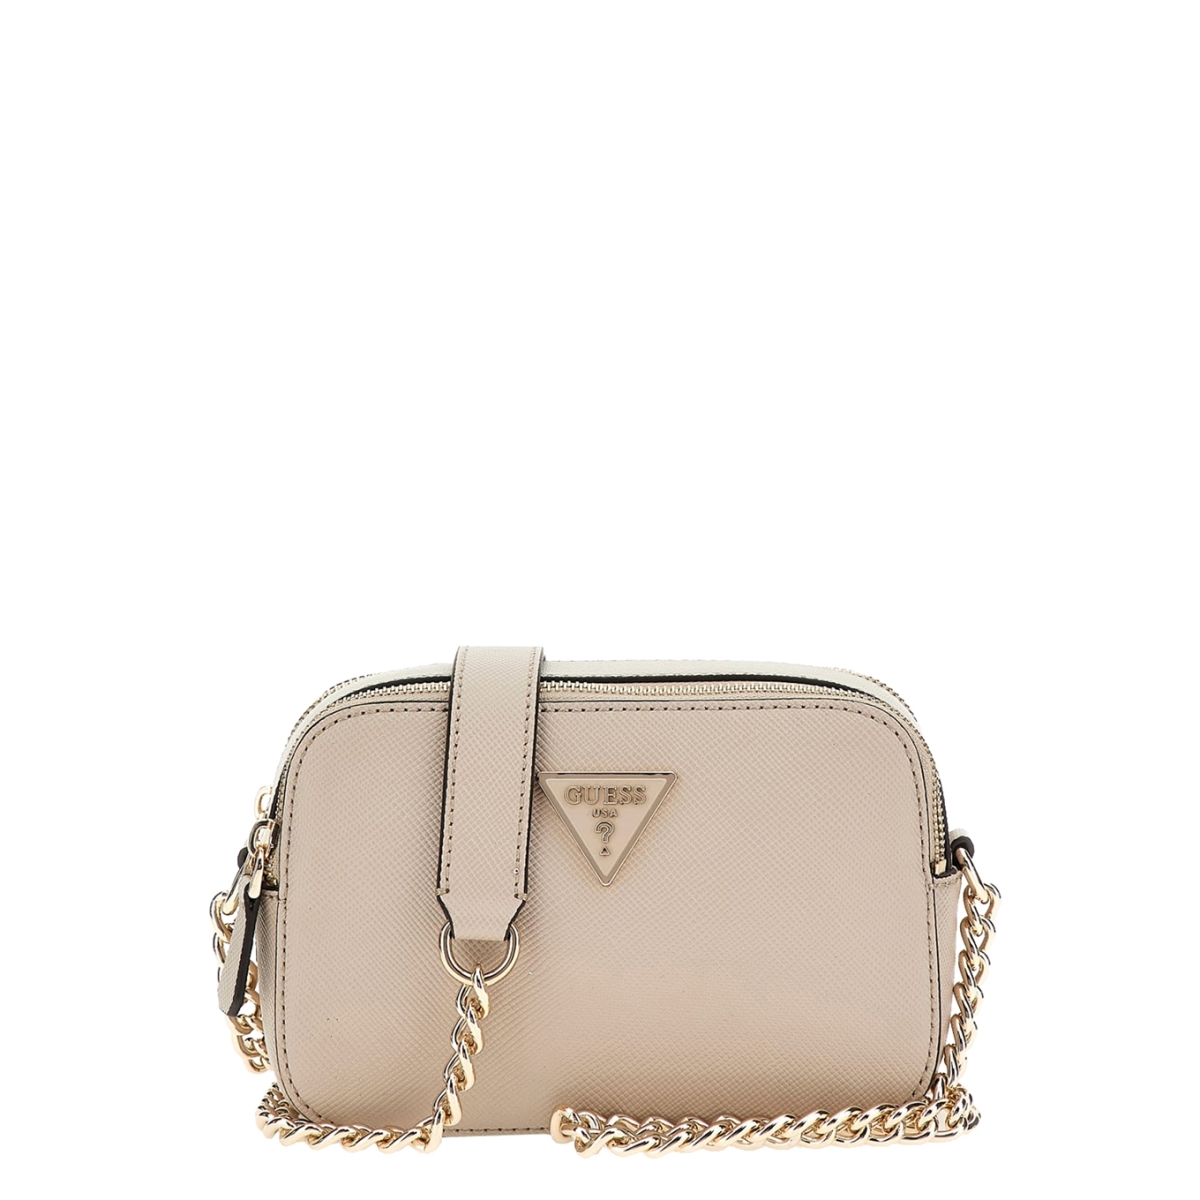 Guess Noelle Crossbody Camera taupe